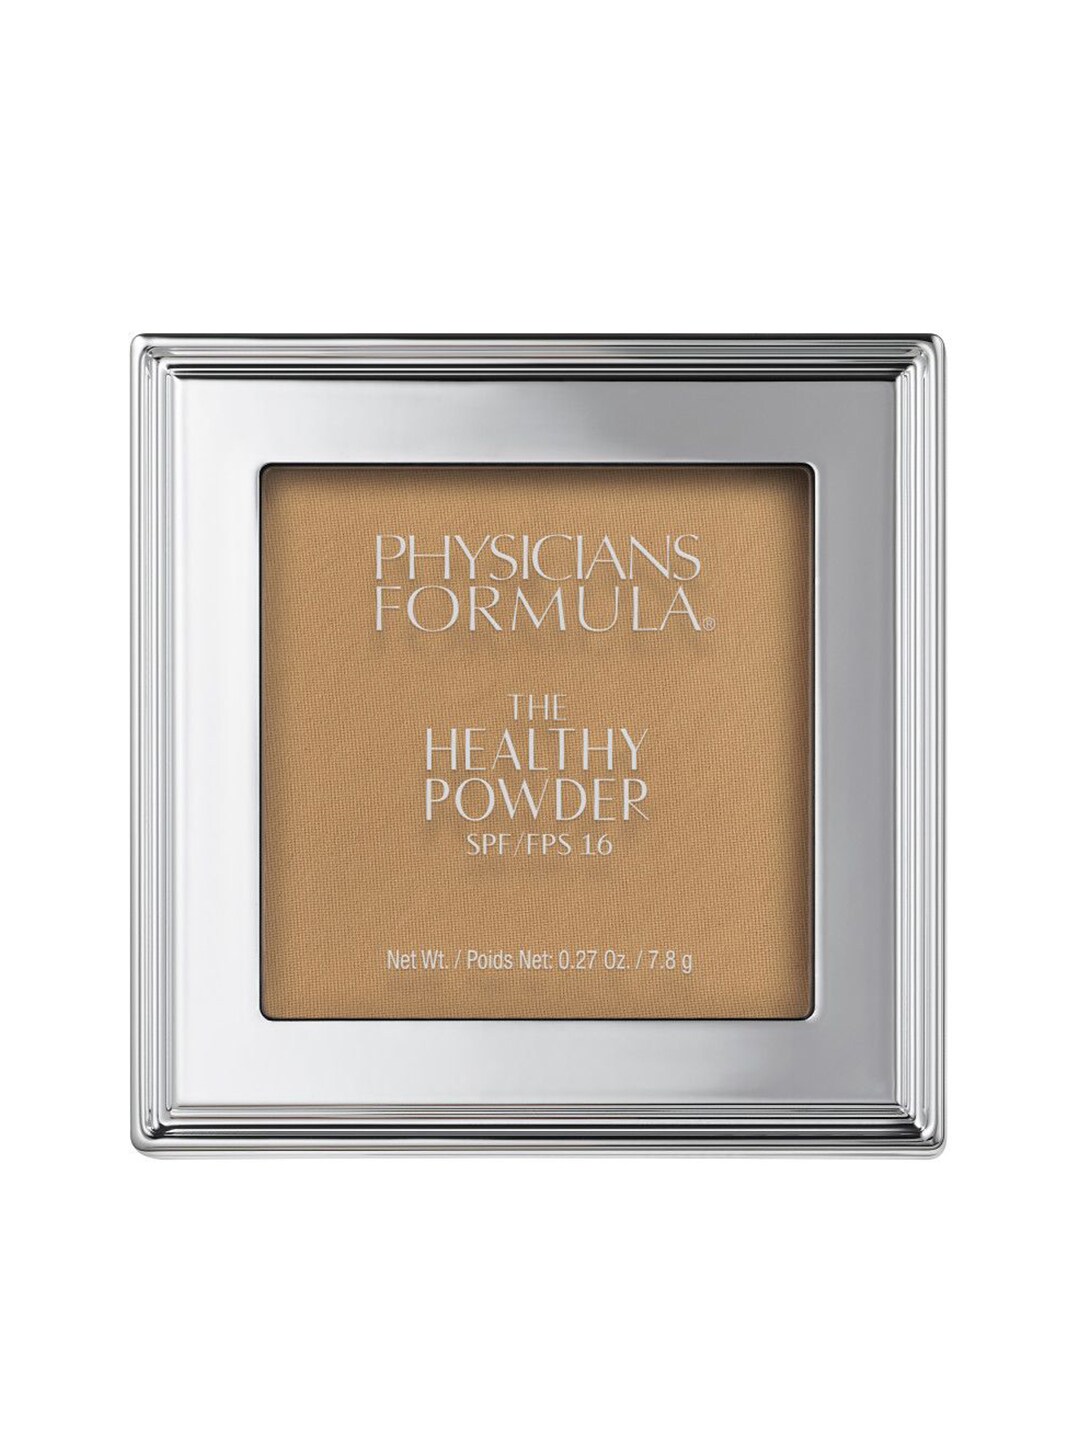 Physicians Formula The Healthy Powder SPF 15 Medium Tan Cool DC1 7.8 gm Price in India